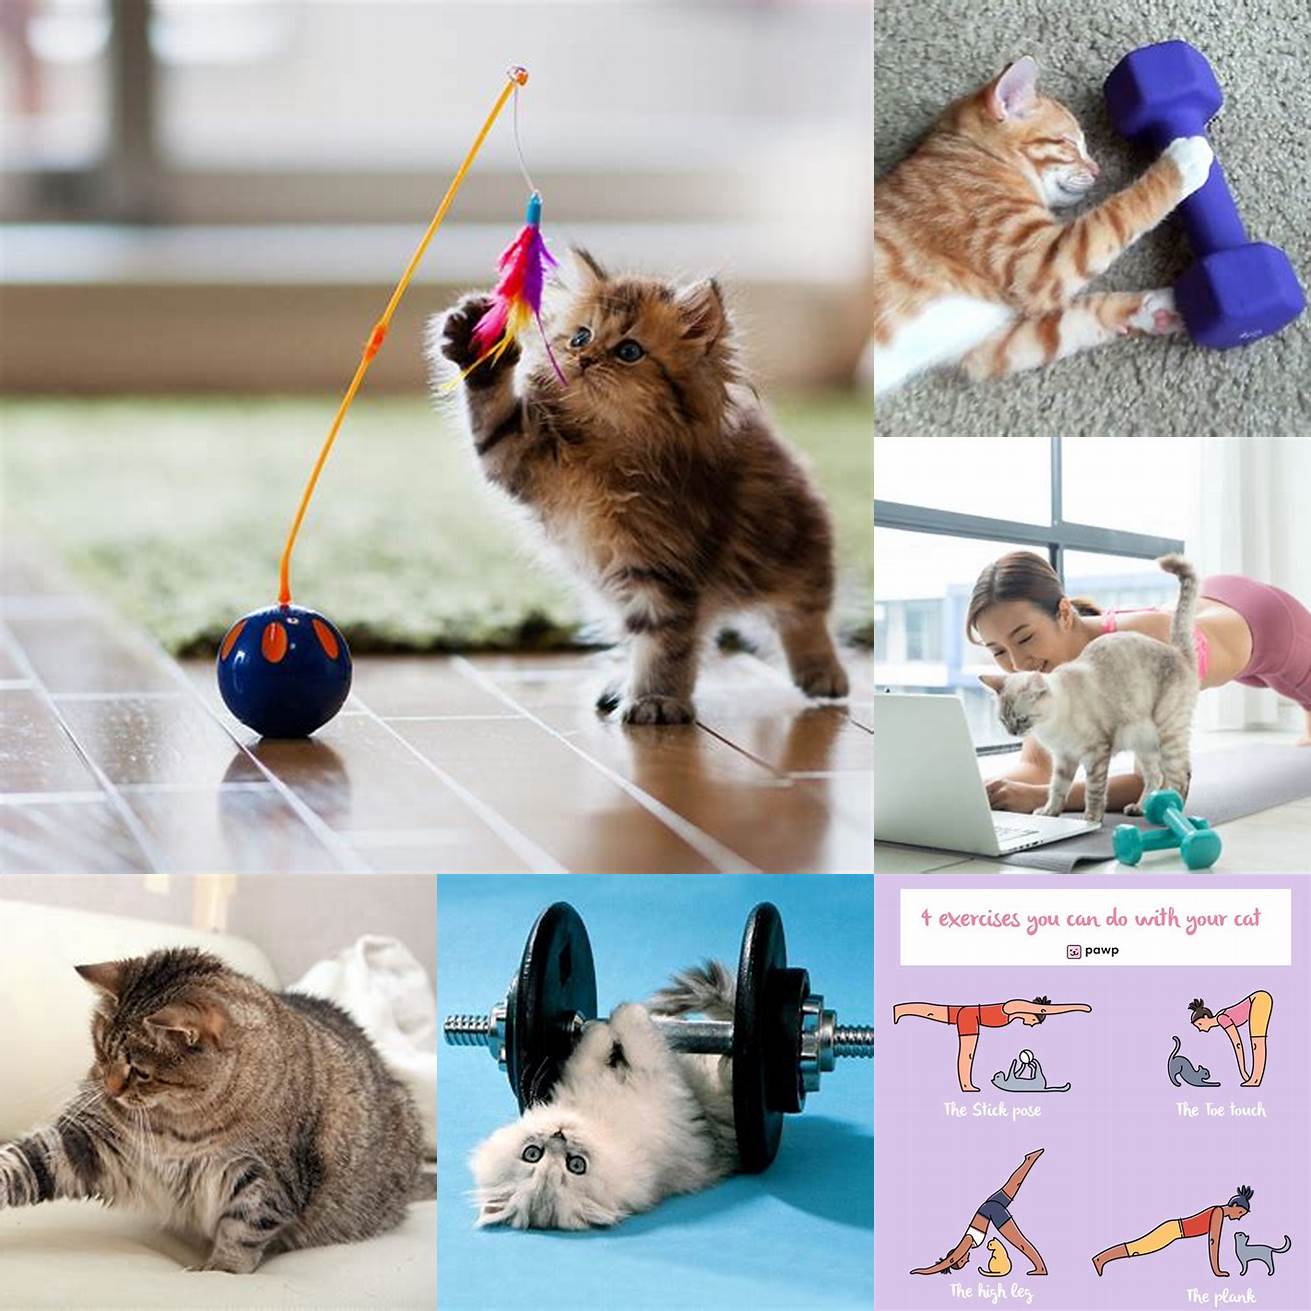 Encourage your cat to exercise regularly